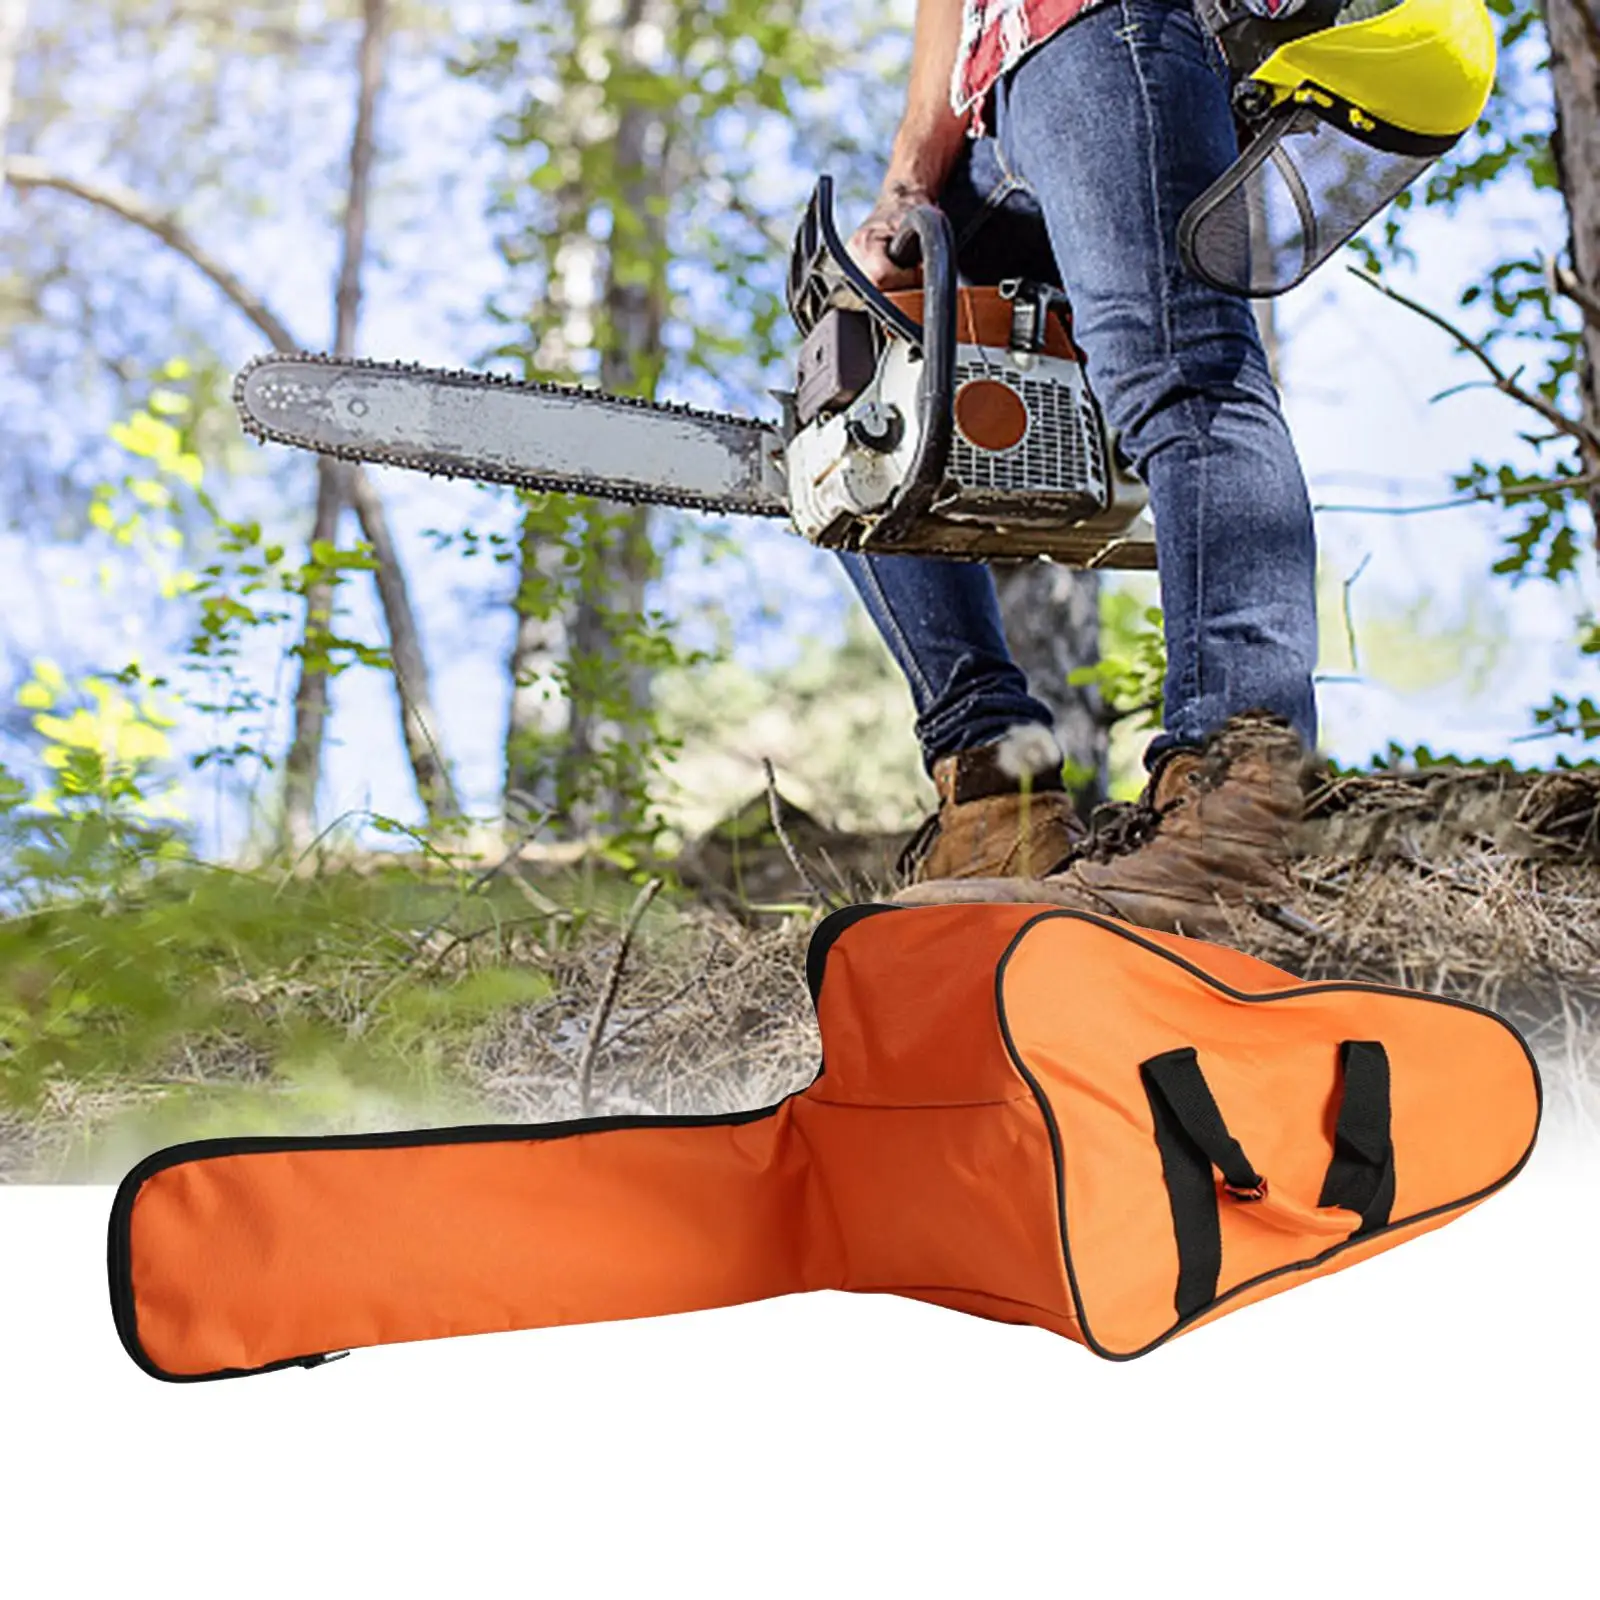 Heavy Duty Chainsaw Carrying Bag Case Full Protection Protective Storage Bags Holder Oxford Carrying Tools Bag Waterproof